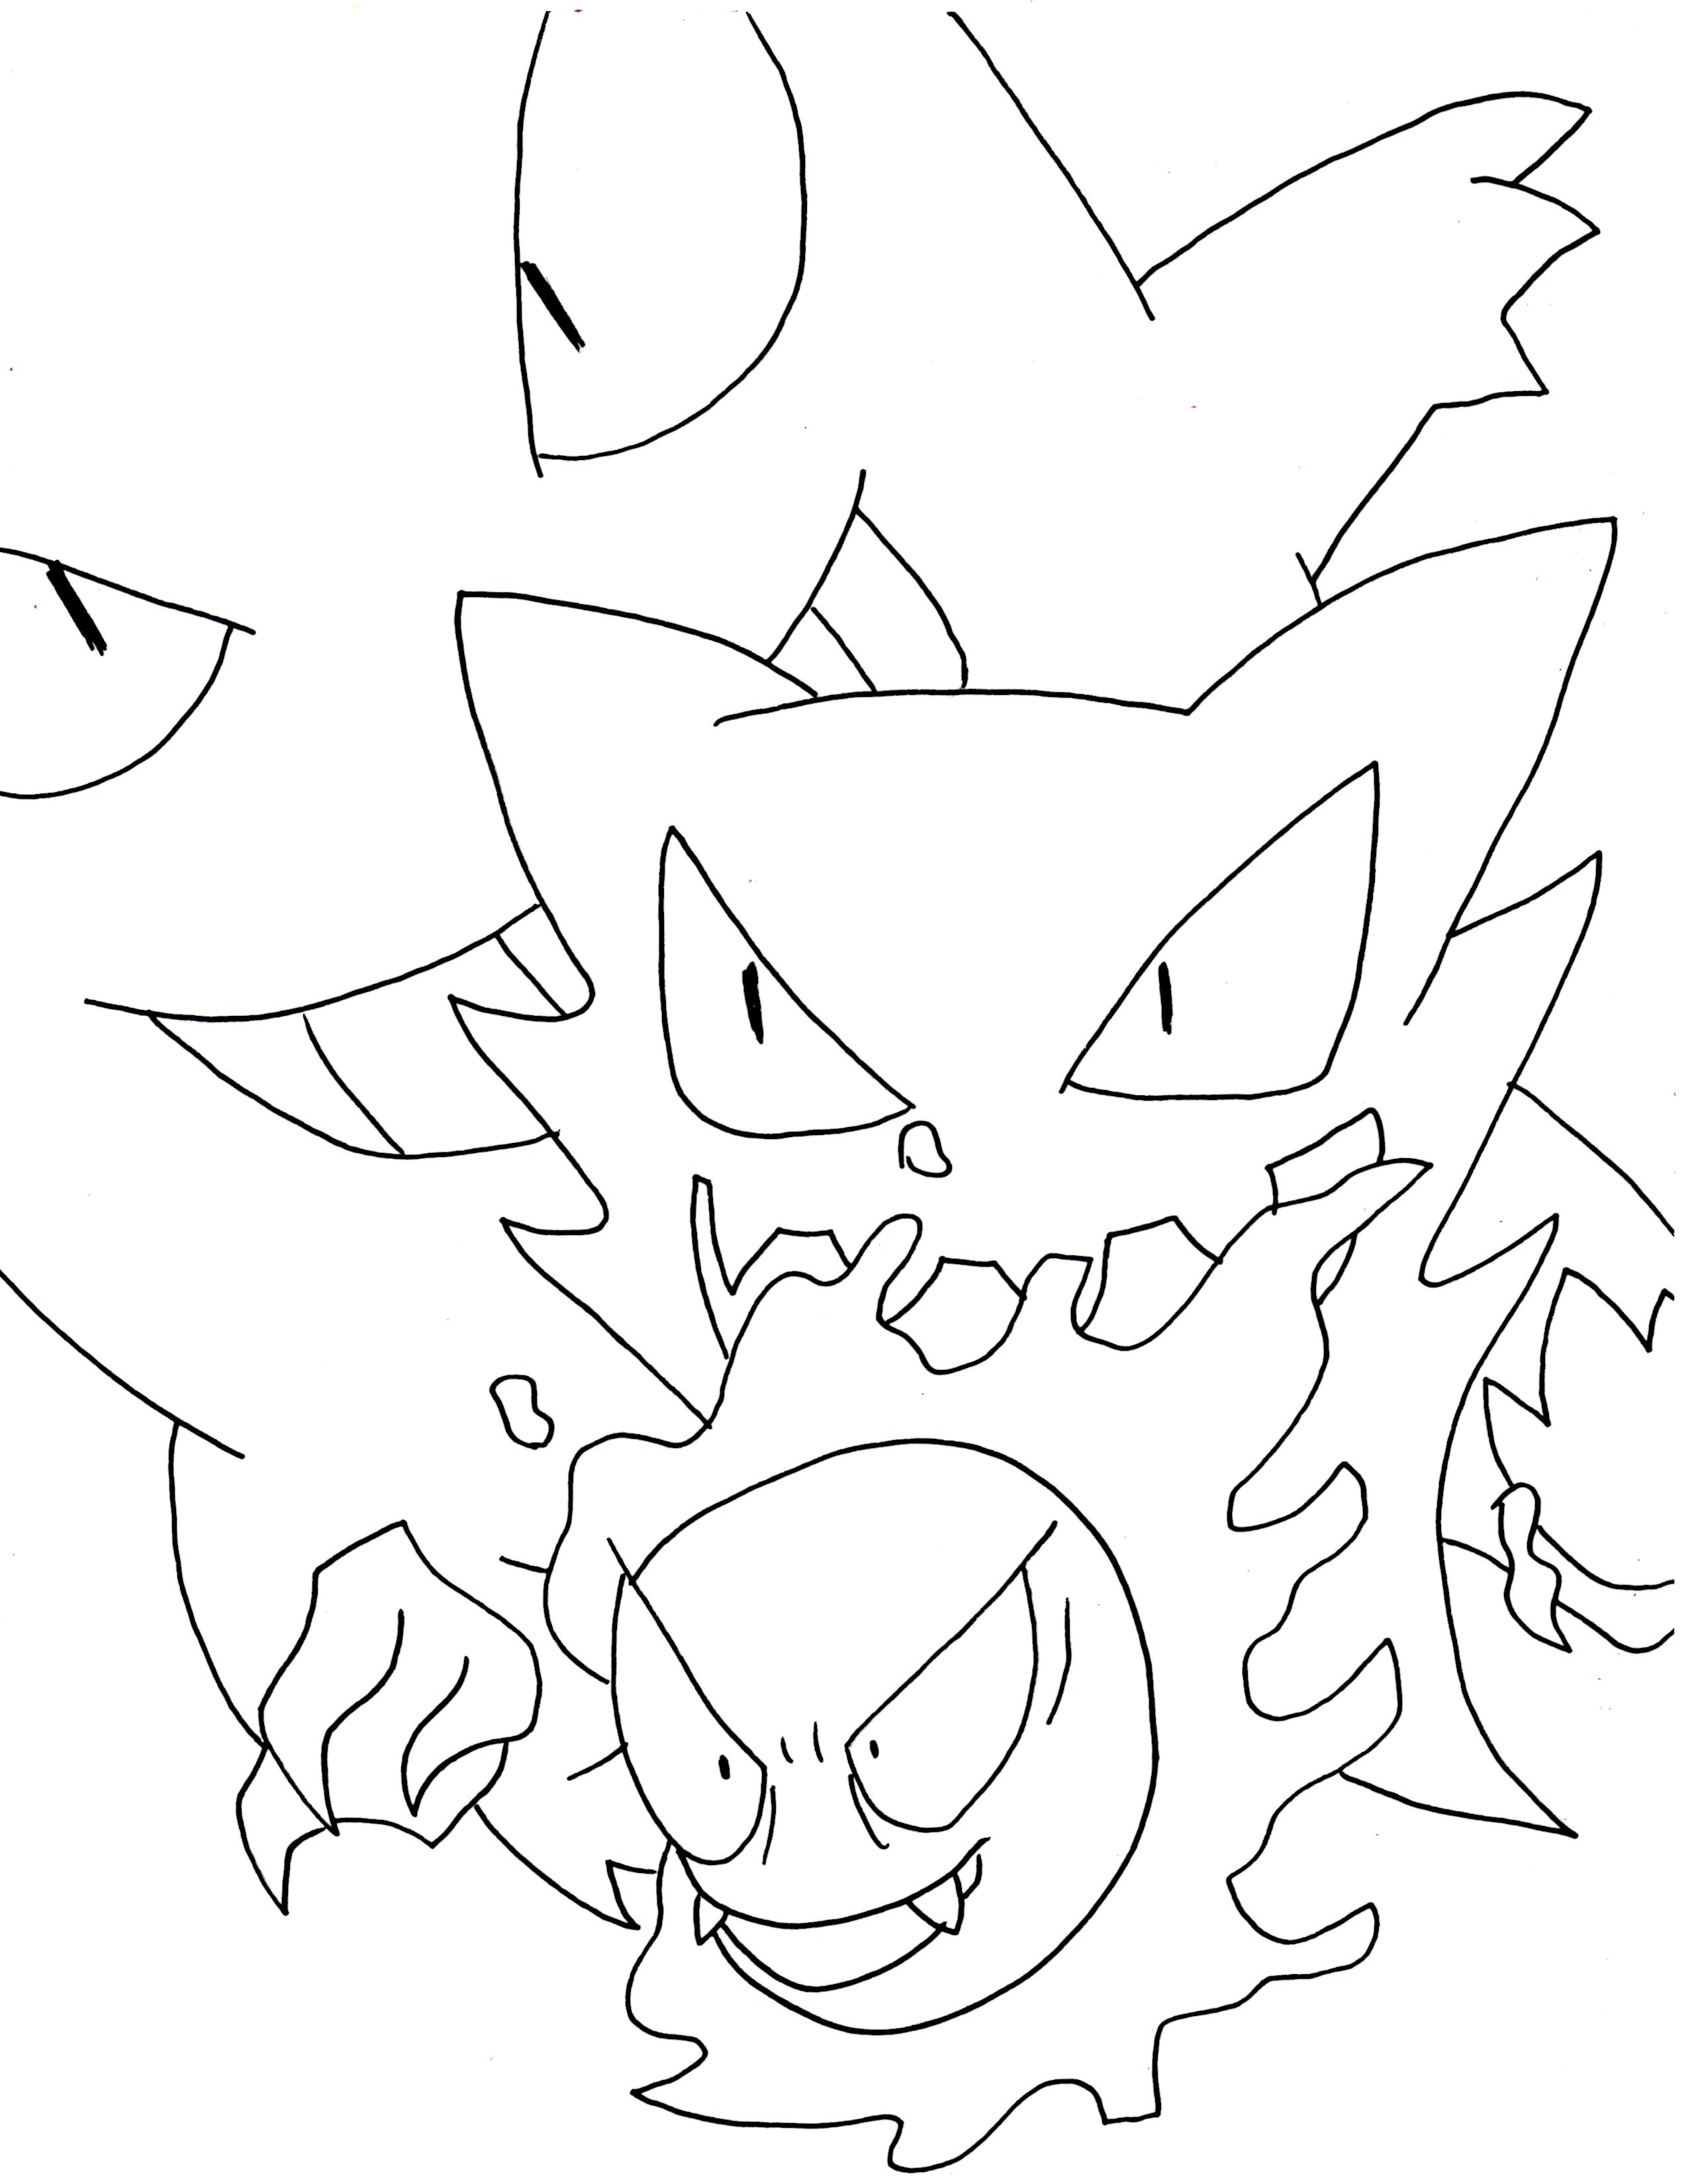 Gastly haunter and gengar coloring page by fbombheart on